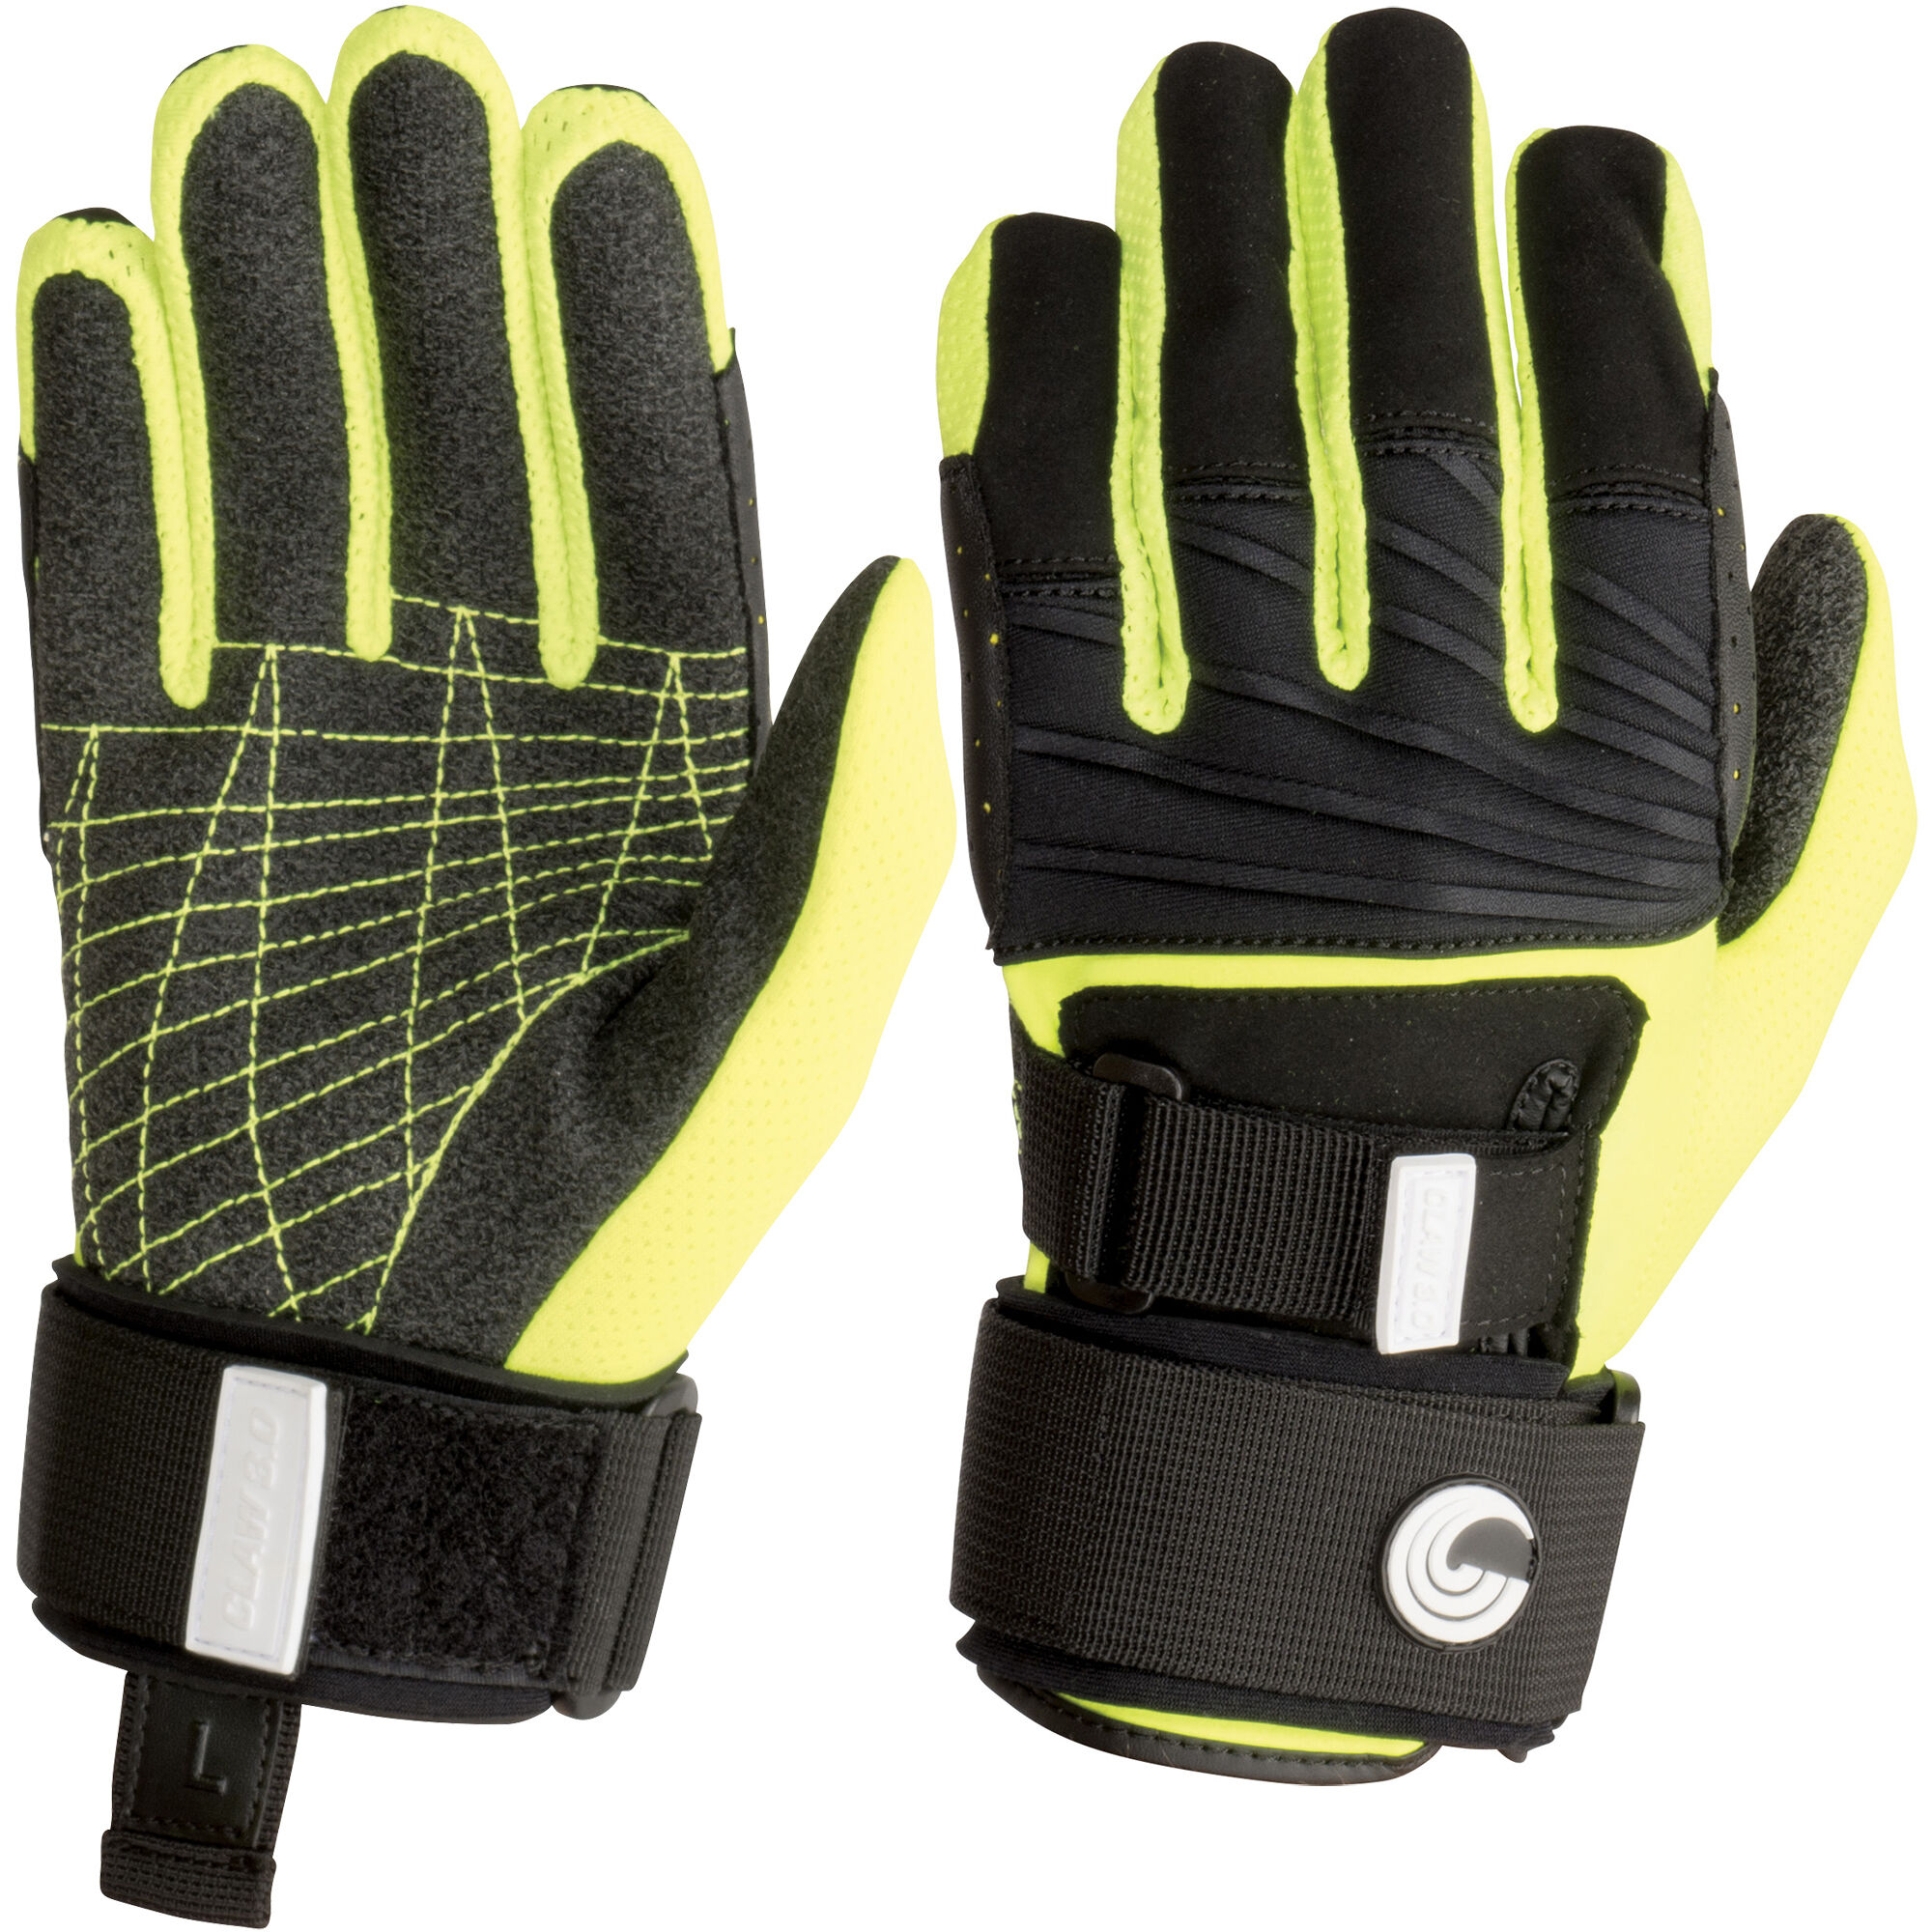 Connelly Claw Waterski Glove - Black/Yellow - M in Pink